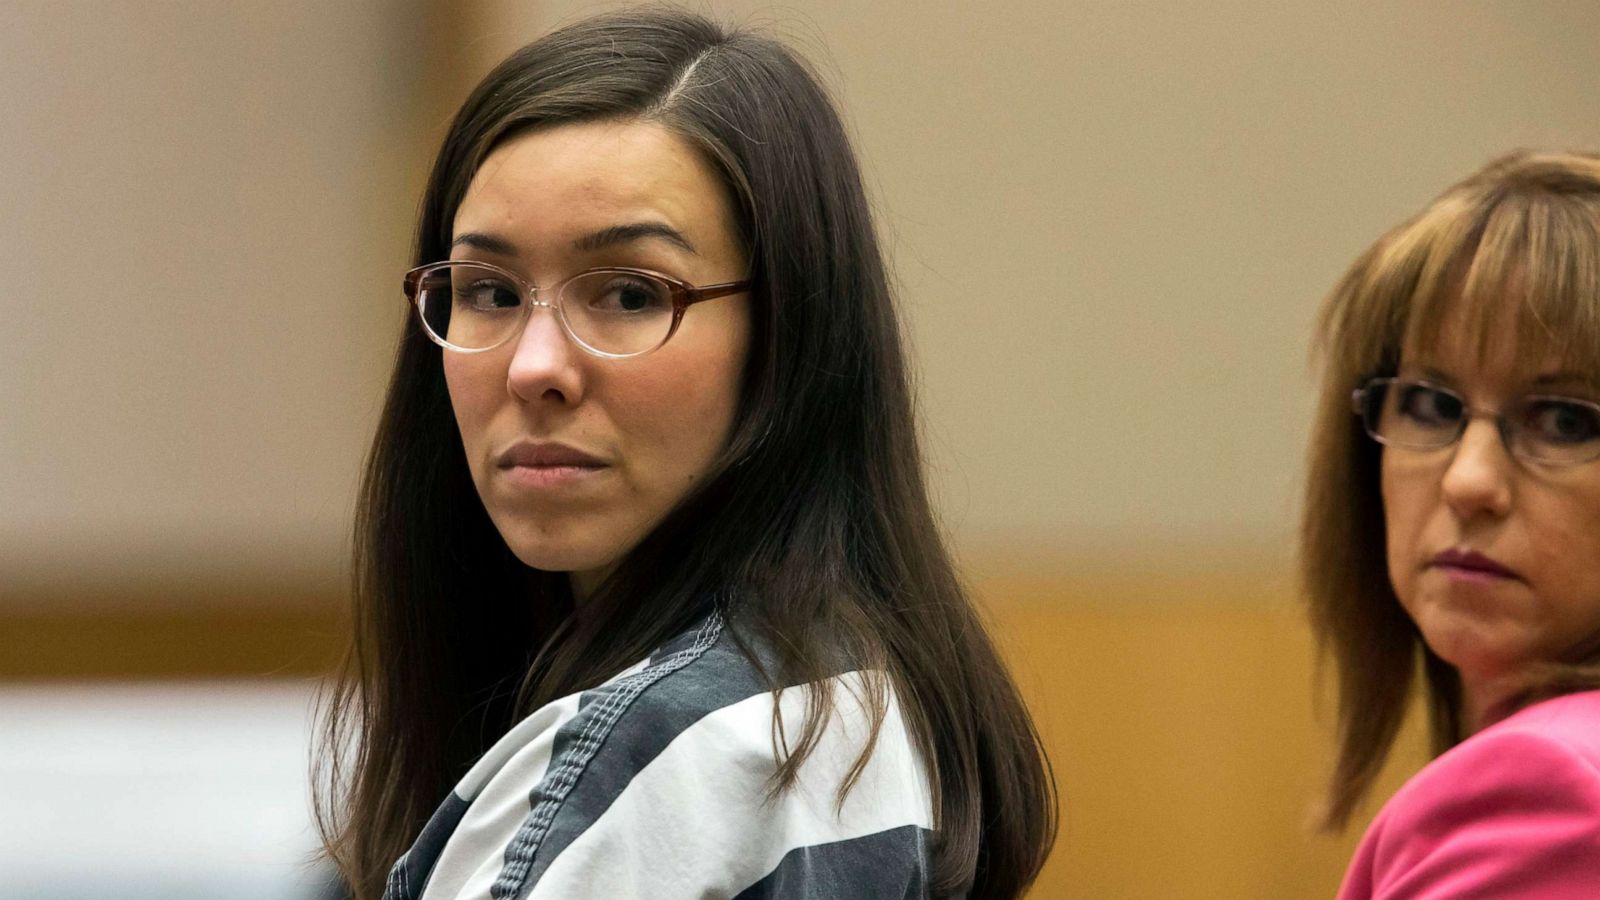 Friends say they warned Travis Alexander that Jodi Arias was dangerous for months before she killed